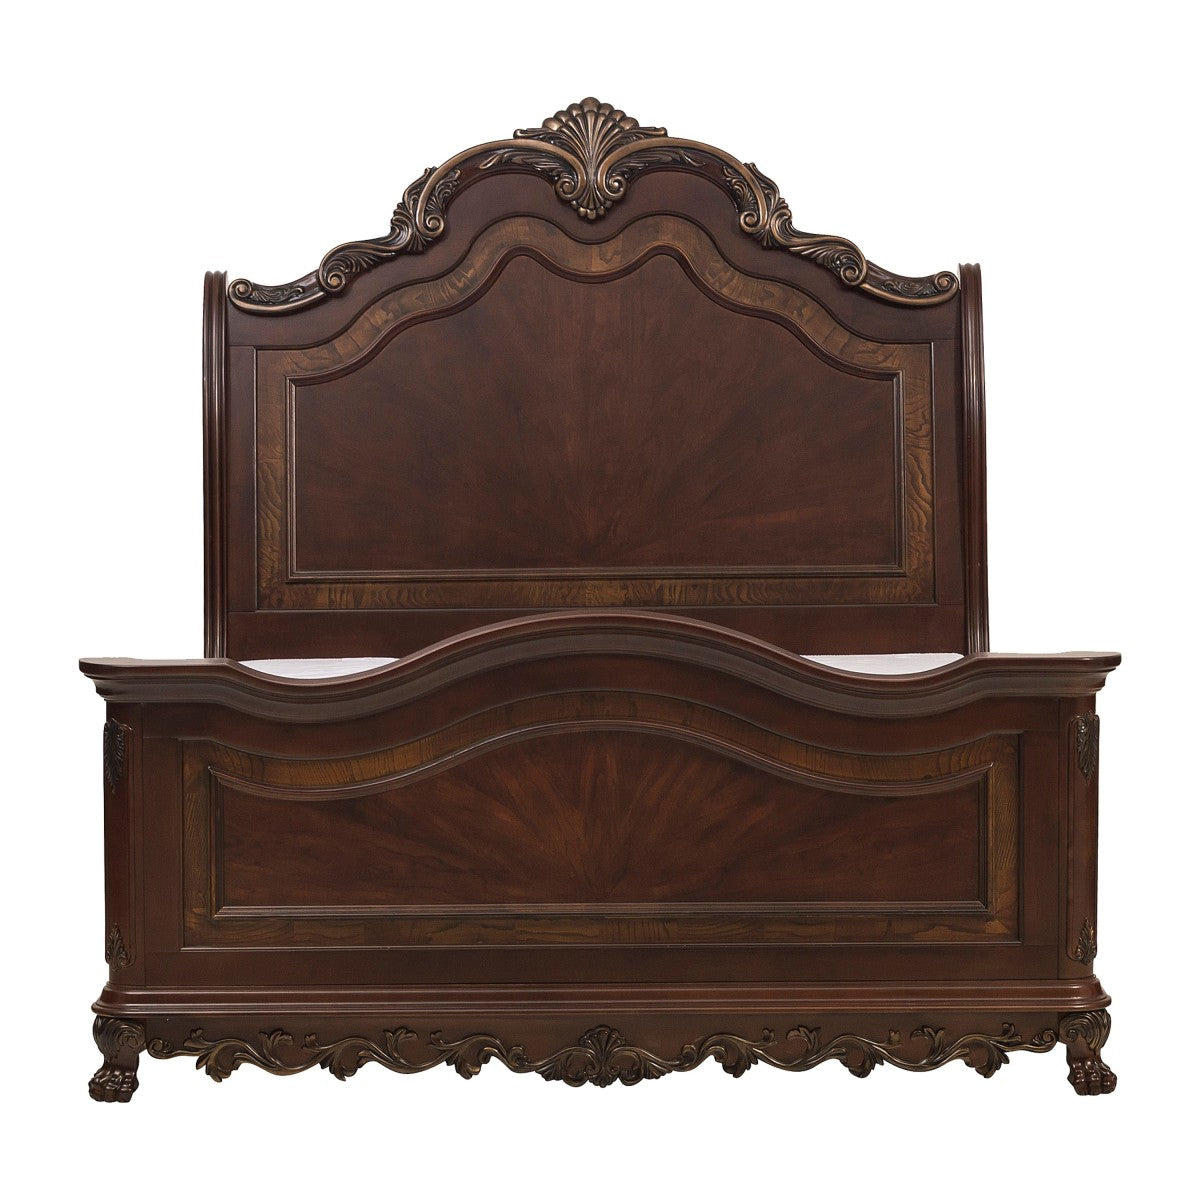 Deryn Park Cherry Traditional Cherry And Walnut Veneer Wood And Engineered Wood King Sleigh Bed